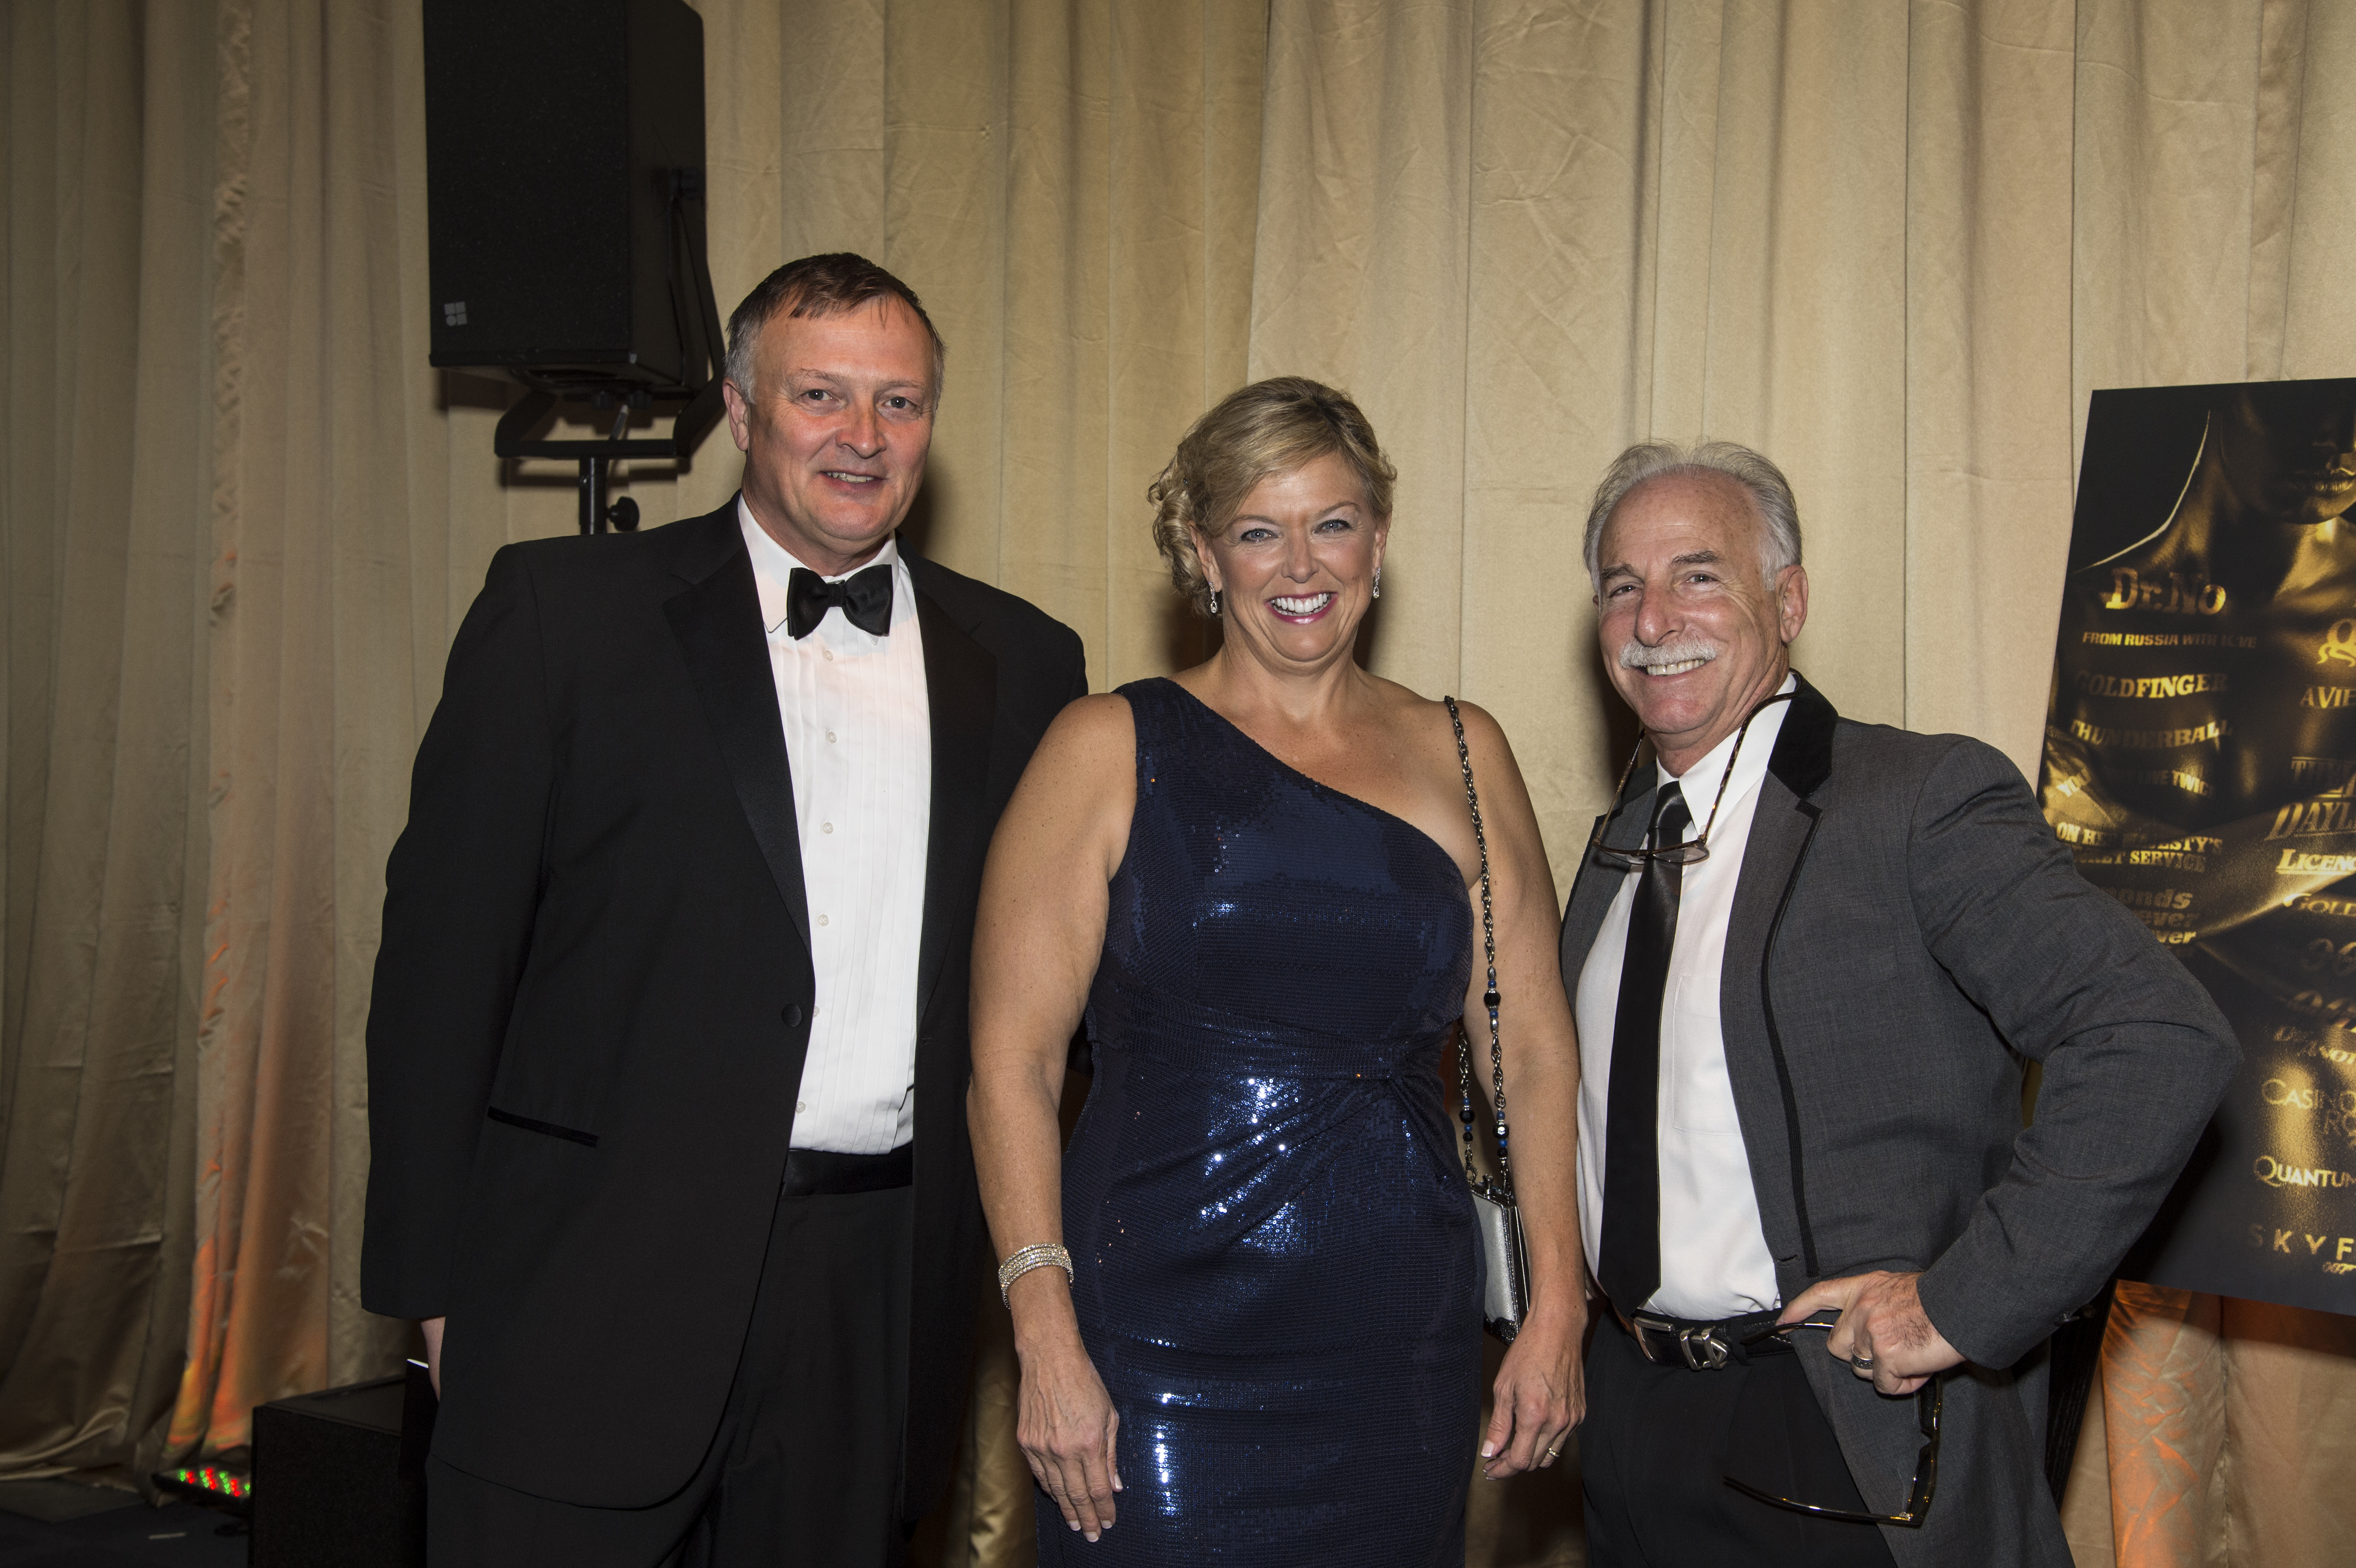 A License to Care: A Bond Bash at this Year’s Capital Caring Gala